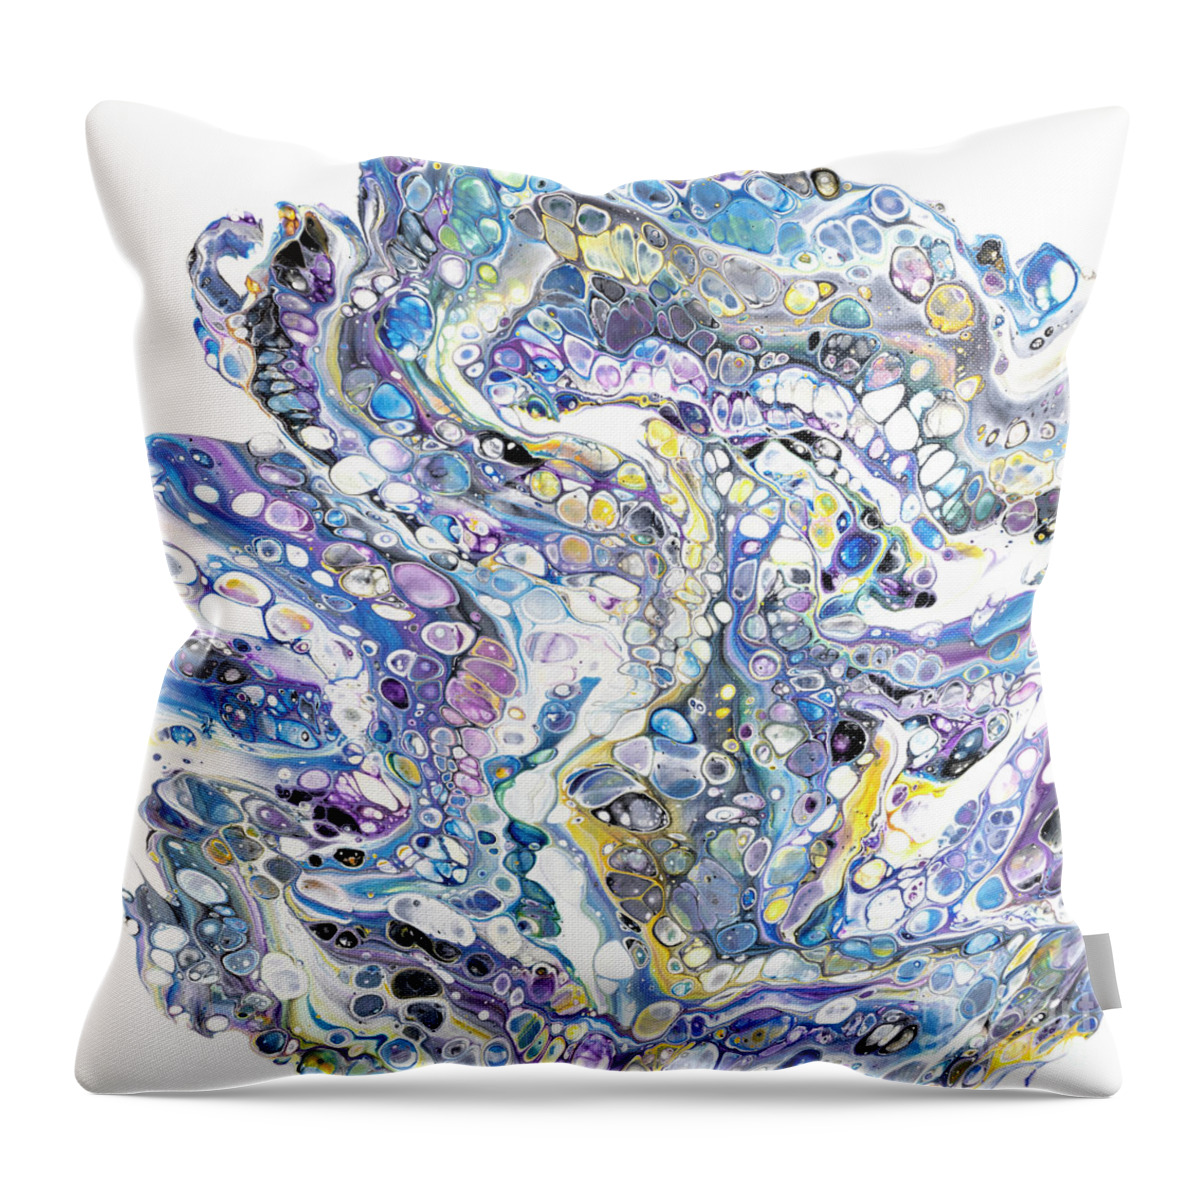 Fluid Acrylic Pour Painting Throw Pillow featuring the painting Blue Tangle by Jane Crabtree